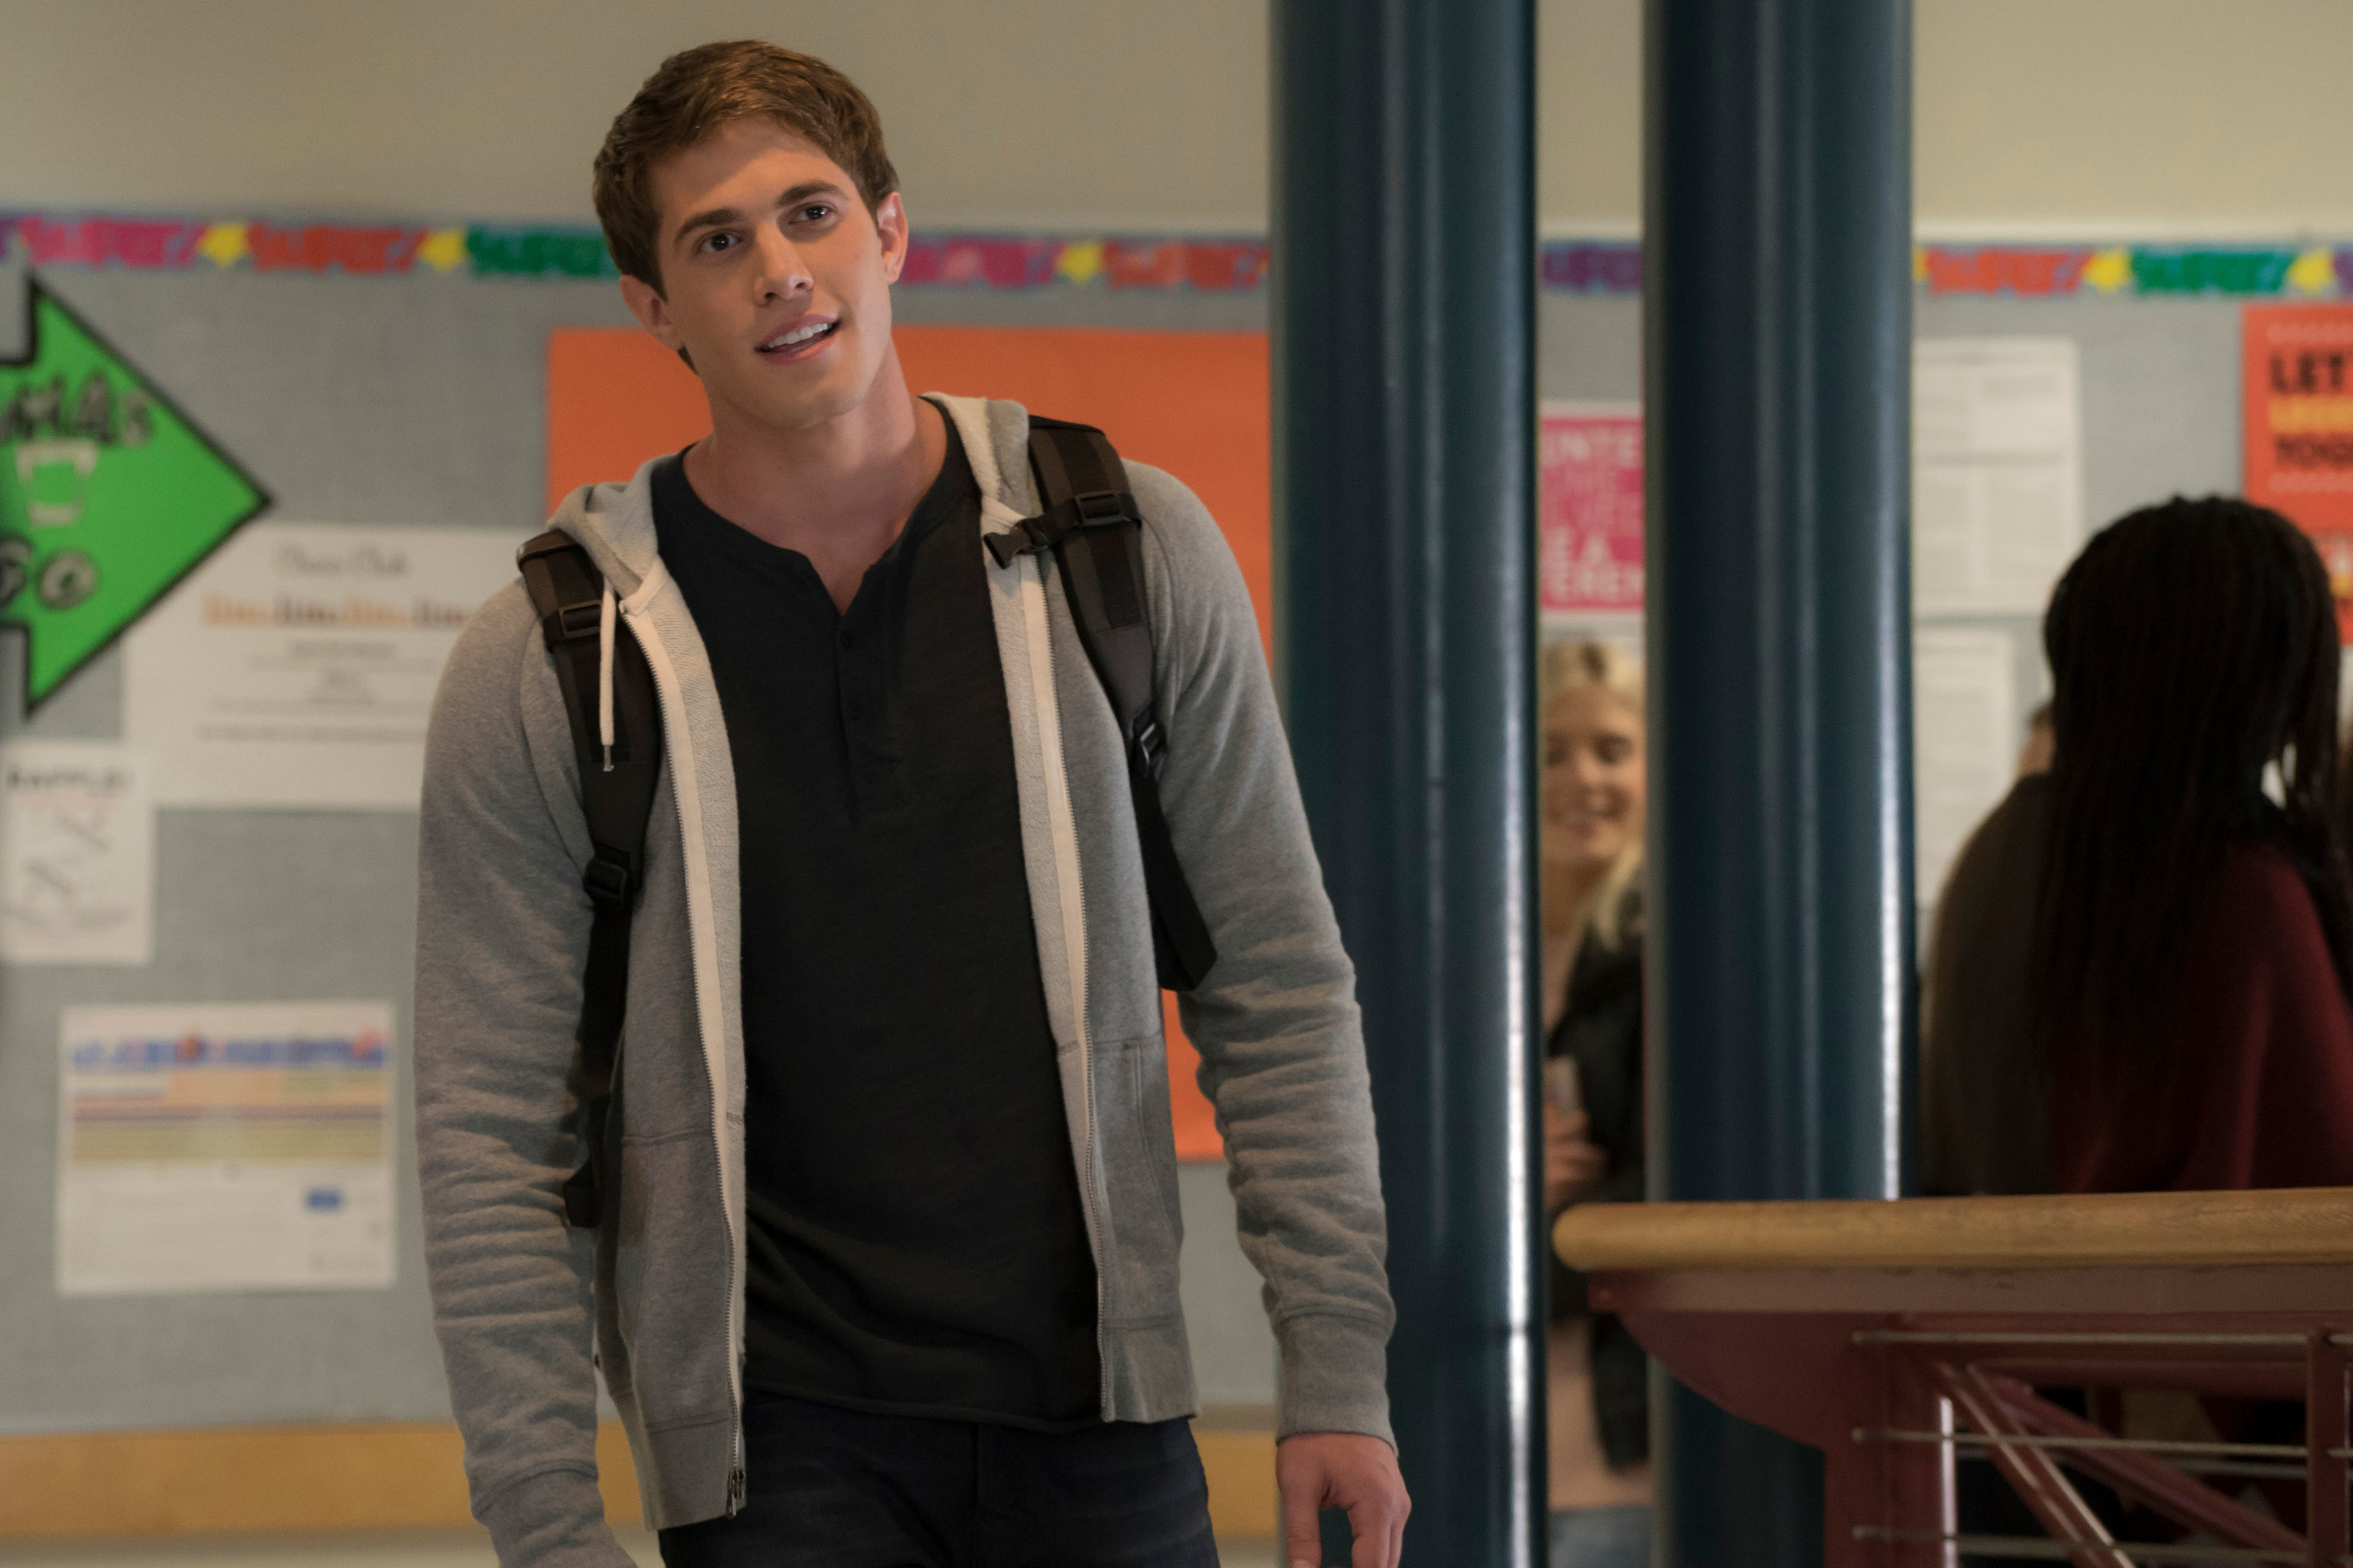 his character walking in a school hallway with a backpack